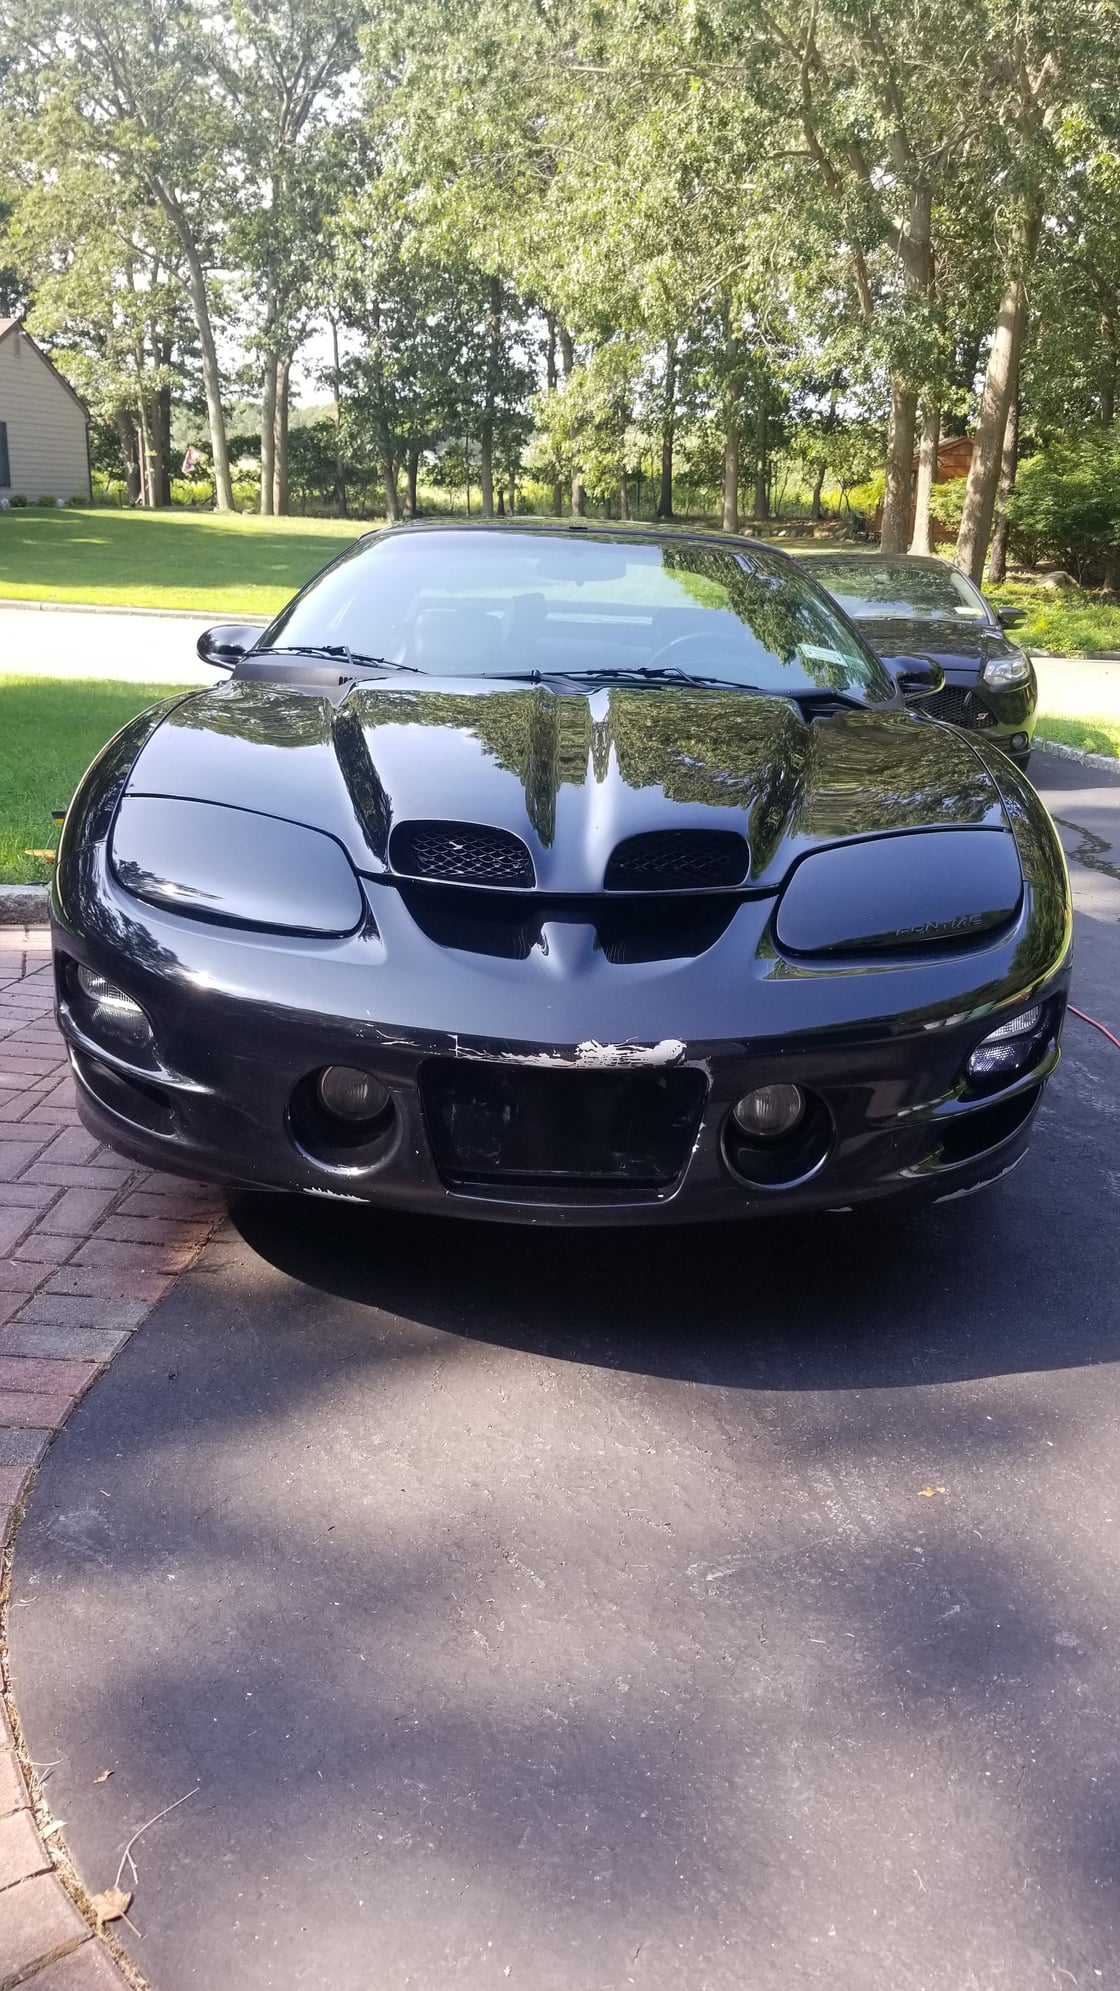 2002 Pontiac Firebird - 2002 Trans Am WS6 - Used - VIN Upon request - 143,000 Miles - 8 cyl - 2WD - Automatic - Coupe - Black - Coram, NY 11727, United States